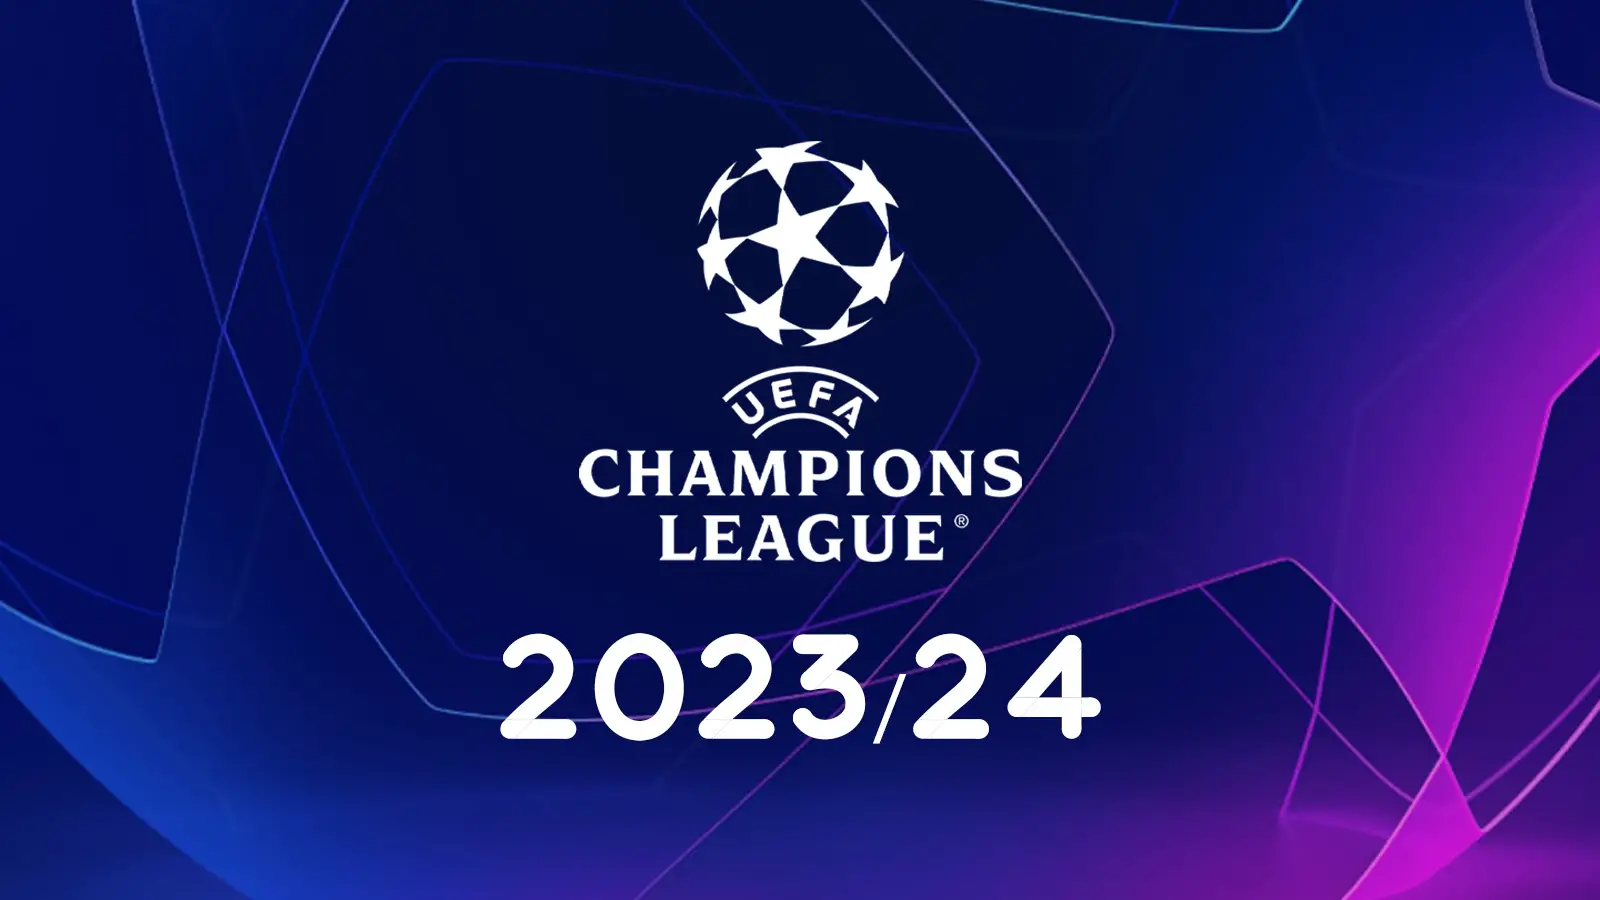 What You Should Know About 2023/2024 UEFA Champion's League As It